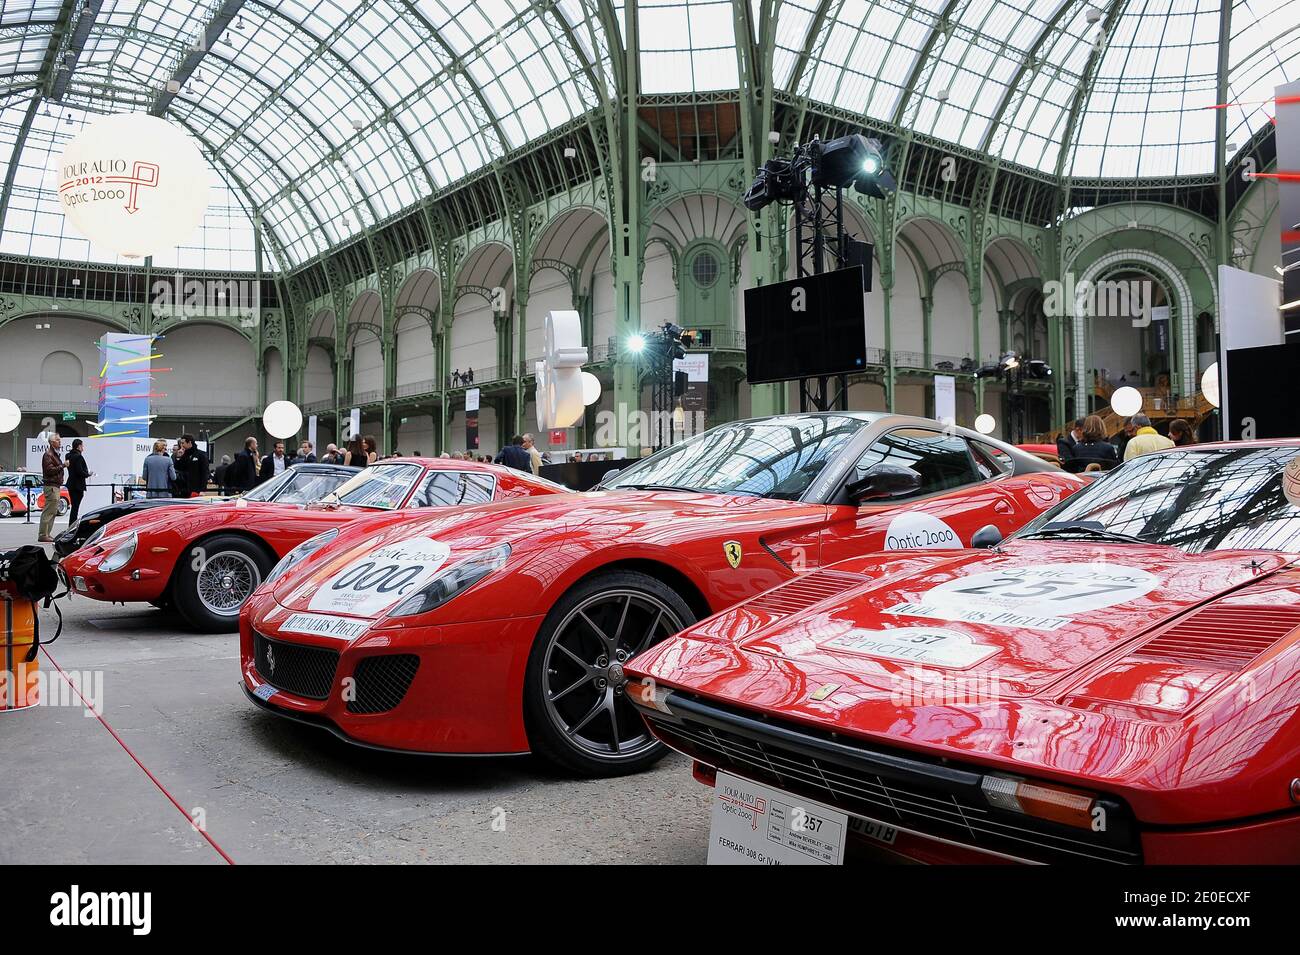 2012 Tour Auto Optic 2000 participants' racing cars are on display for  checks and scutineering at Grand Palais in Paris, France, on April 16,  2012. From 17 to 21 April, 220 prestigious